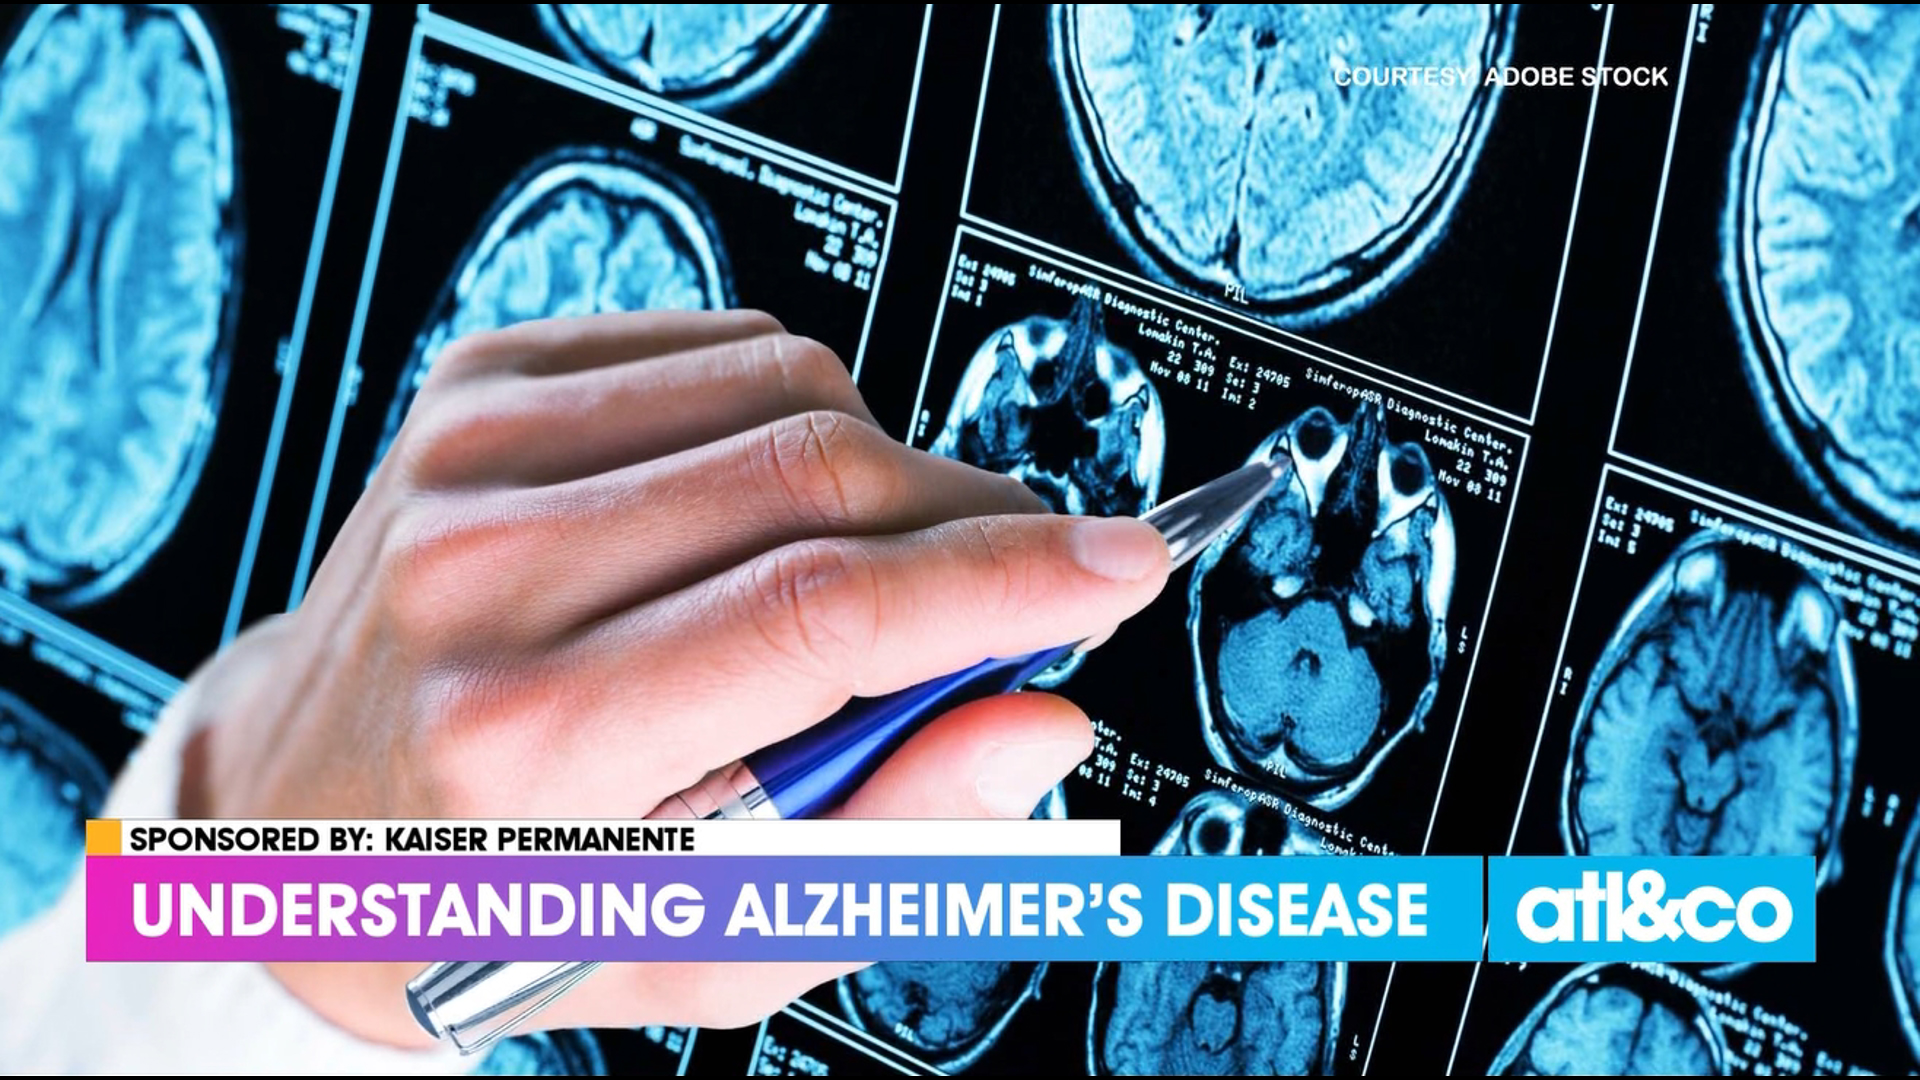 Dr. Jaza Marina from Kaiser Permanente talks about the signs and symptoms of Alzheimer's disease.